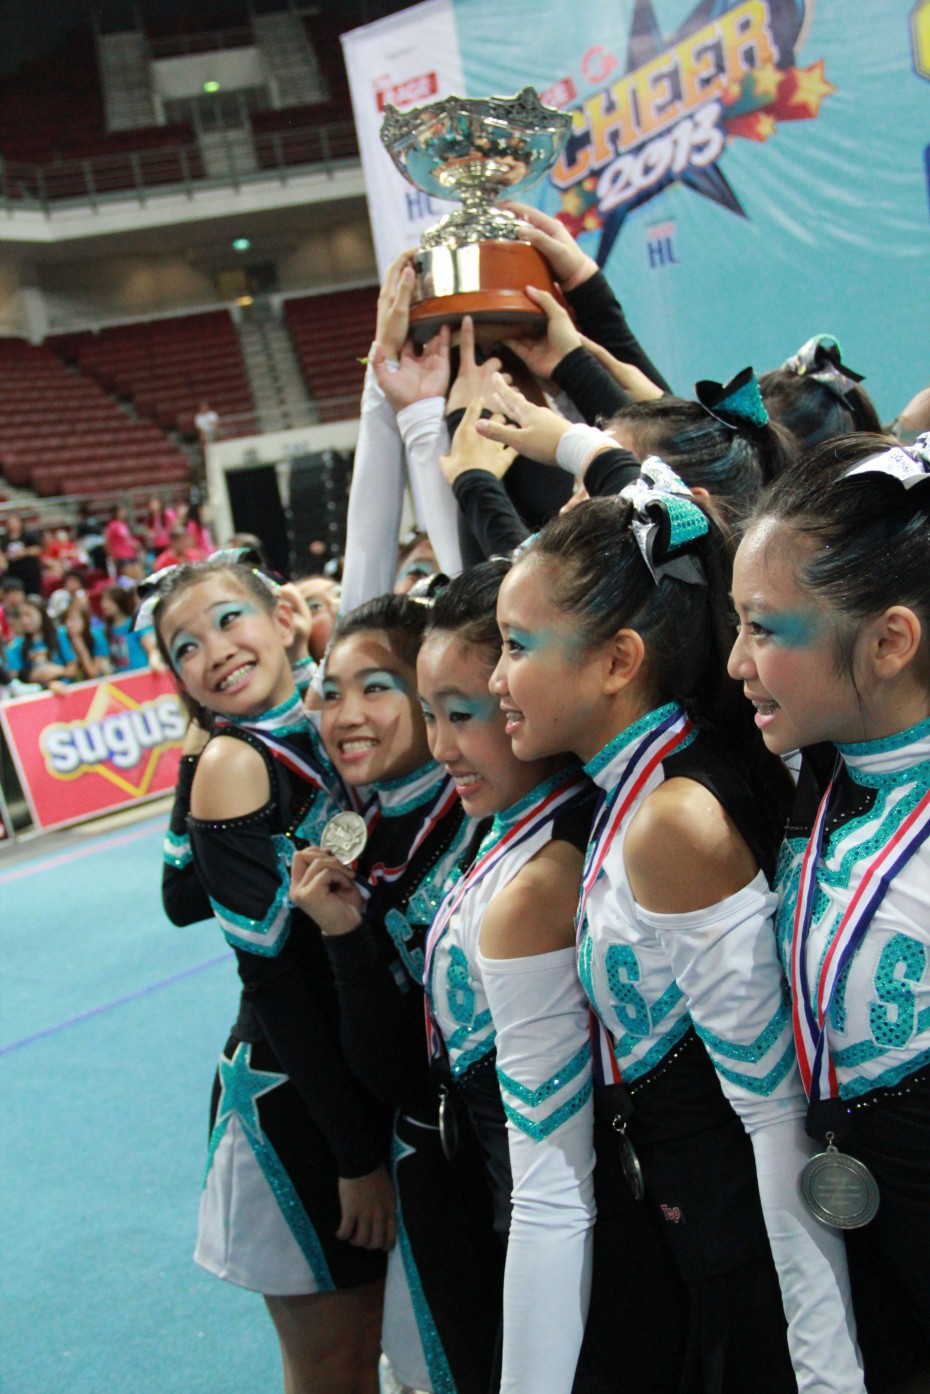 Top teams like the Cyrens train all year round to be ready for competitions like CHEER.